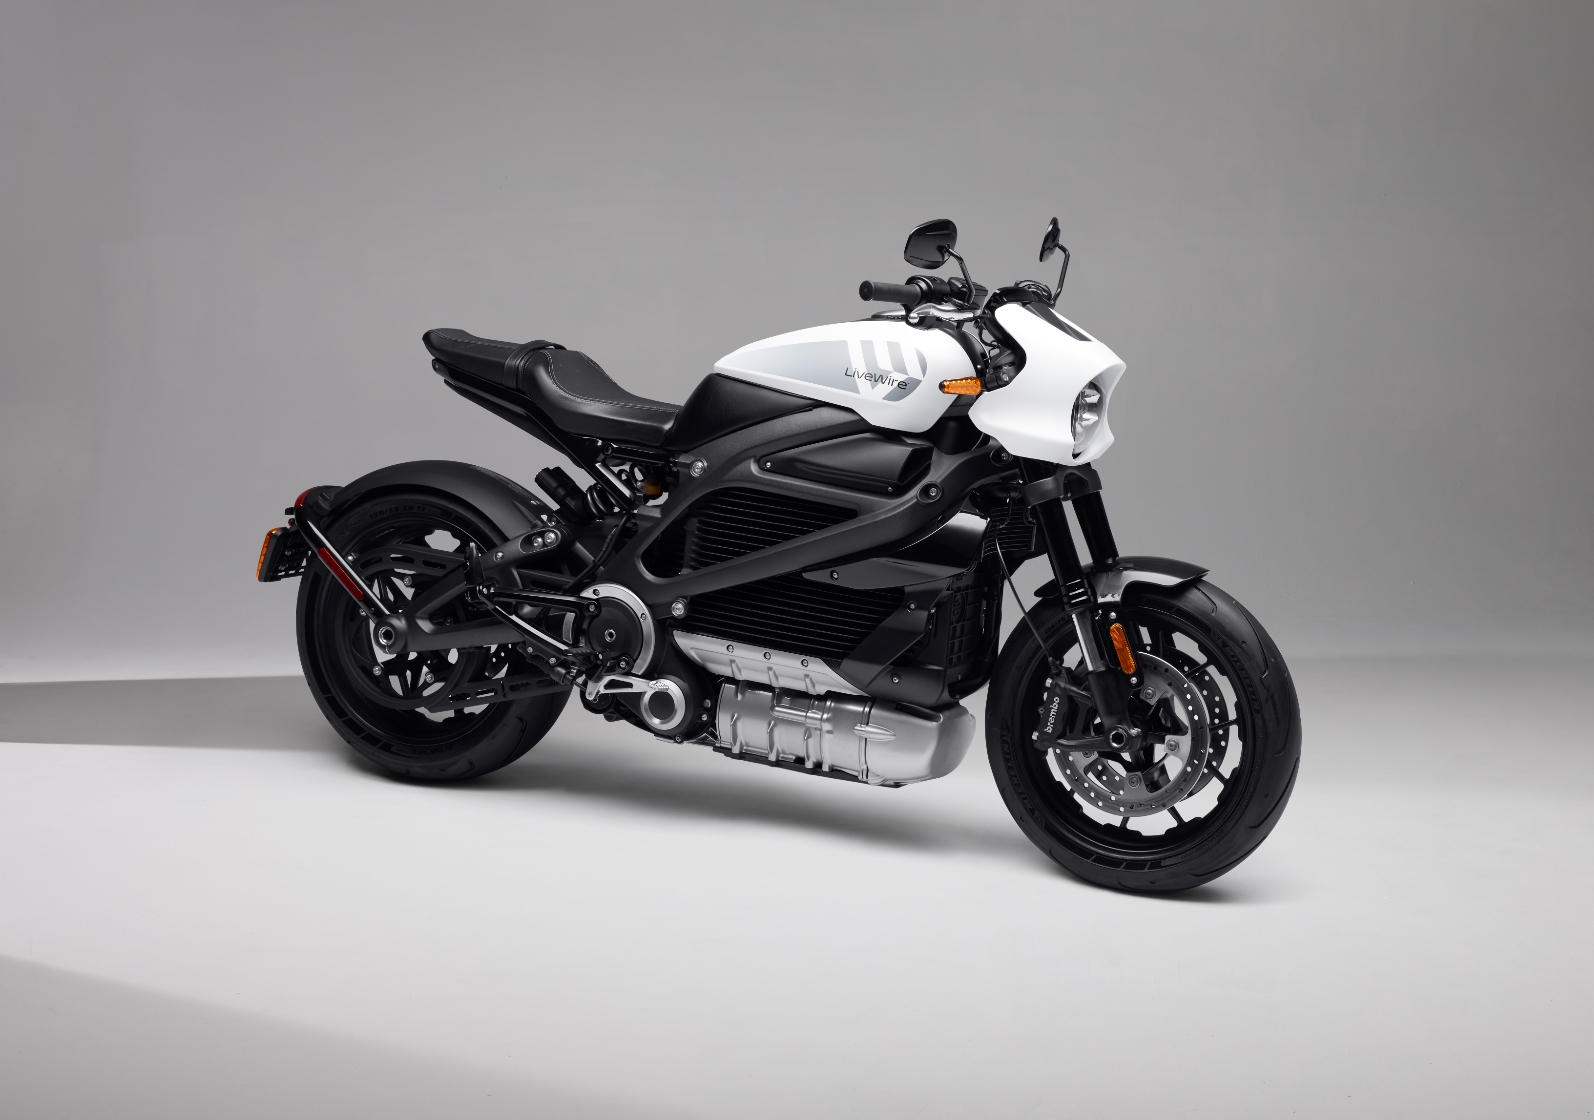 Harley-Davidson Announces LiveWire ONE: New Electric Motorcycle with 235km Range with Price from $21,999